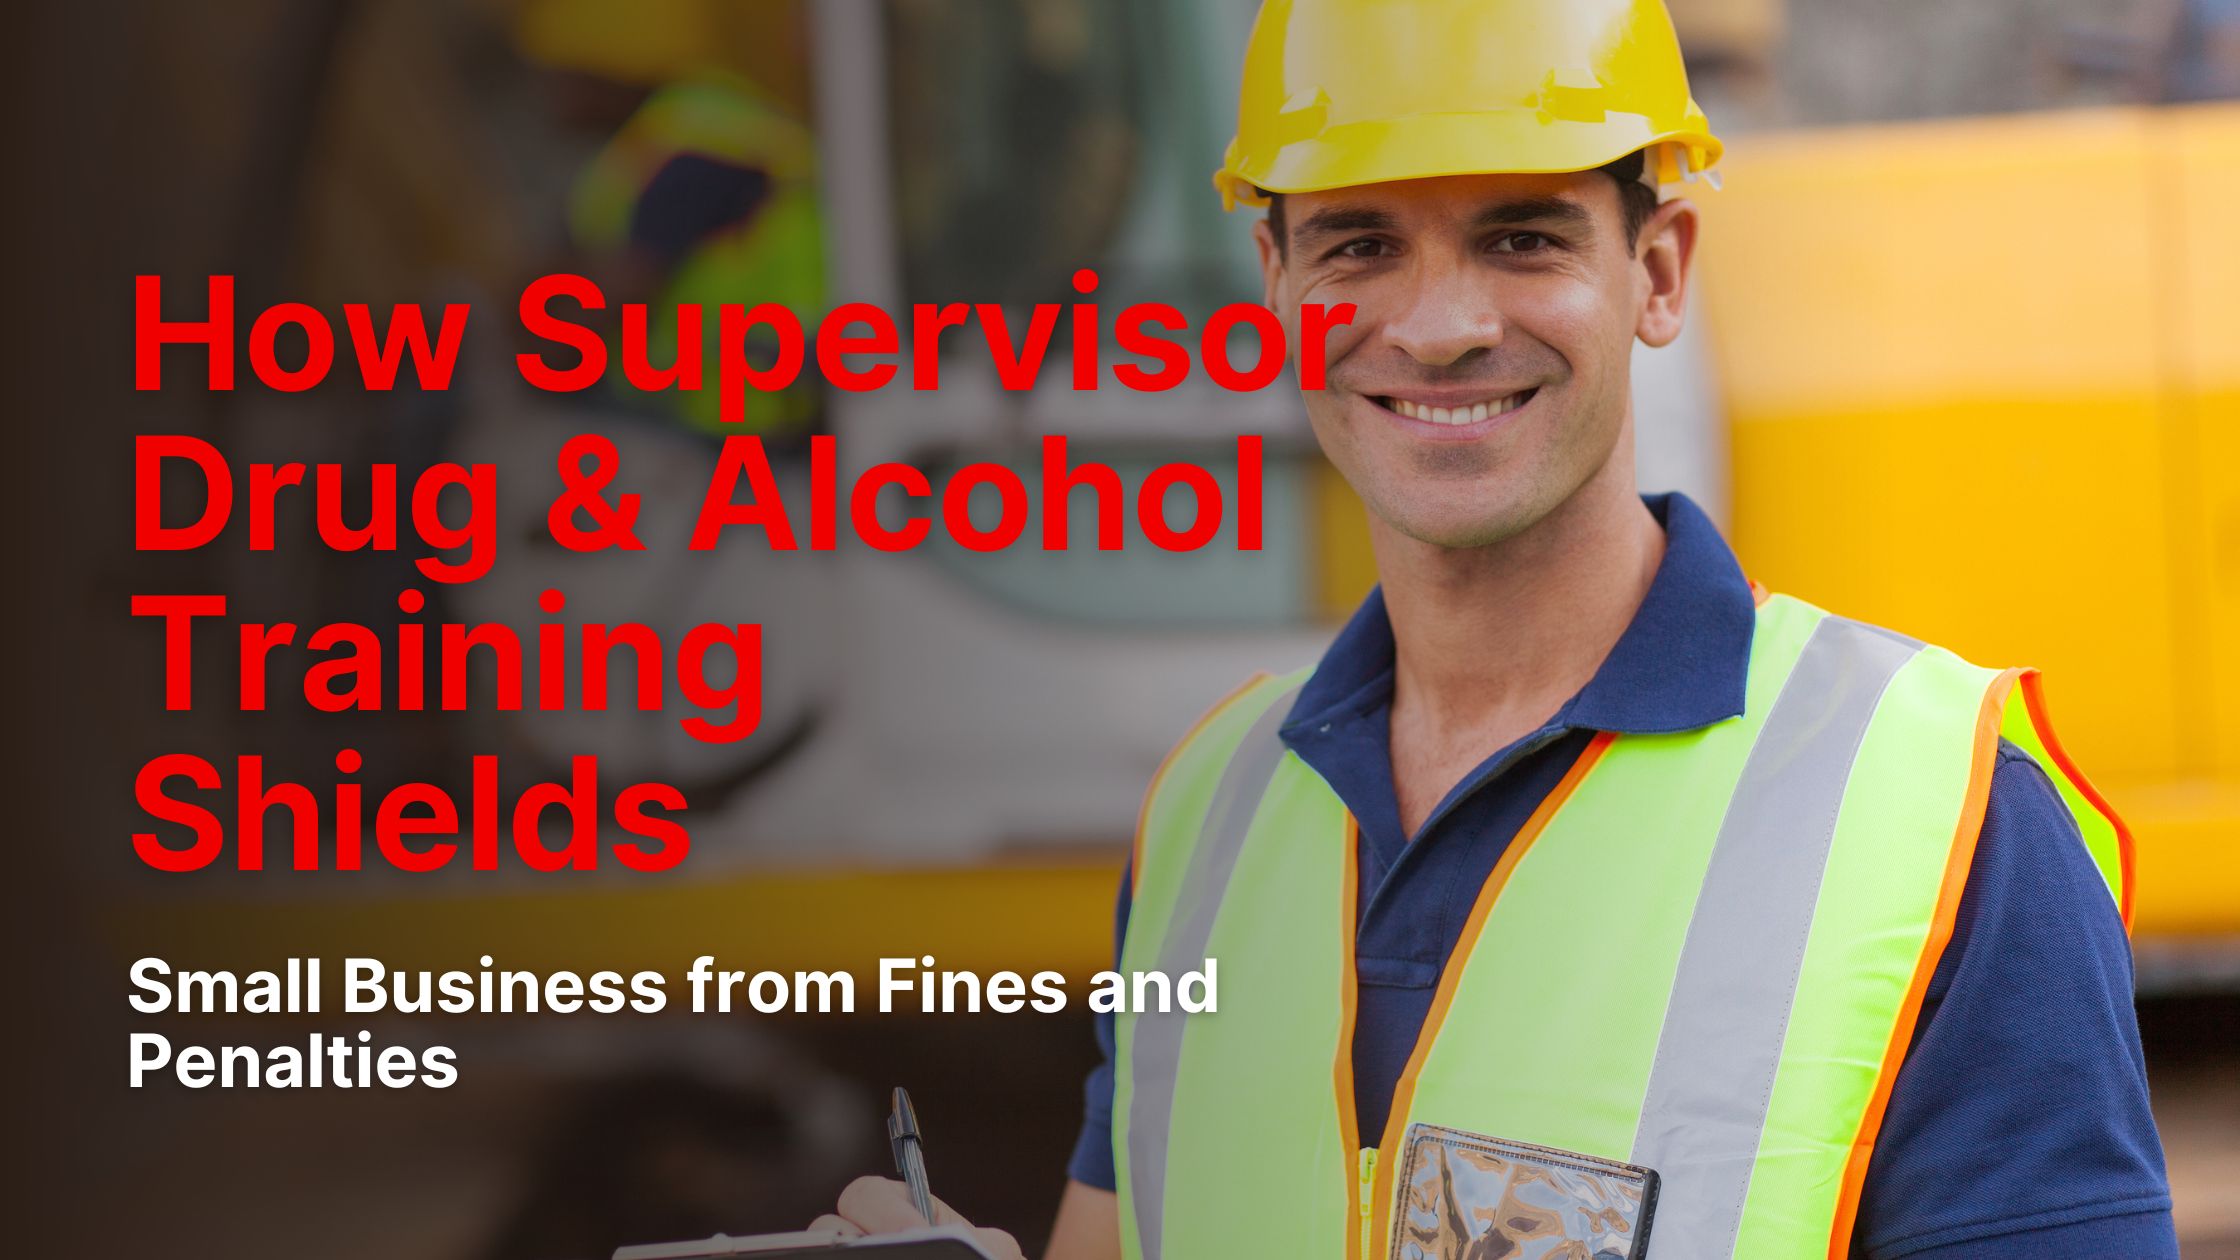 How Supervisor Drug and Alcohol Training Shields Small Business from Fines and Penalties